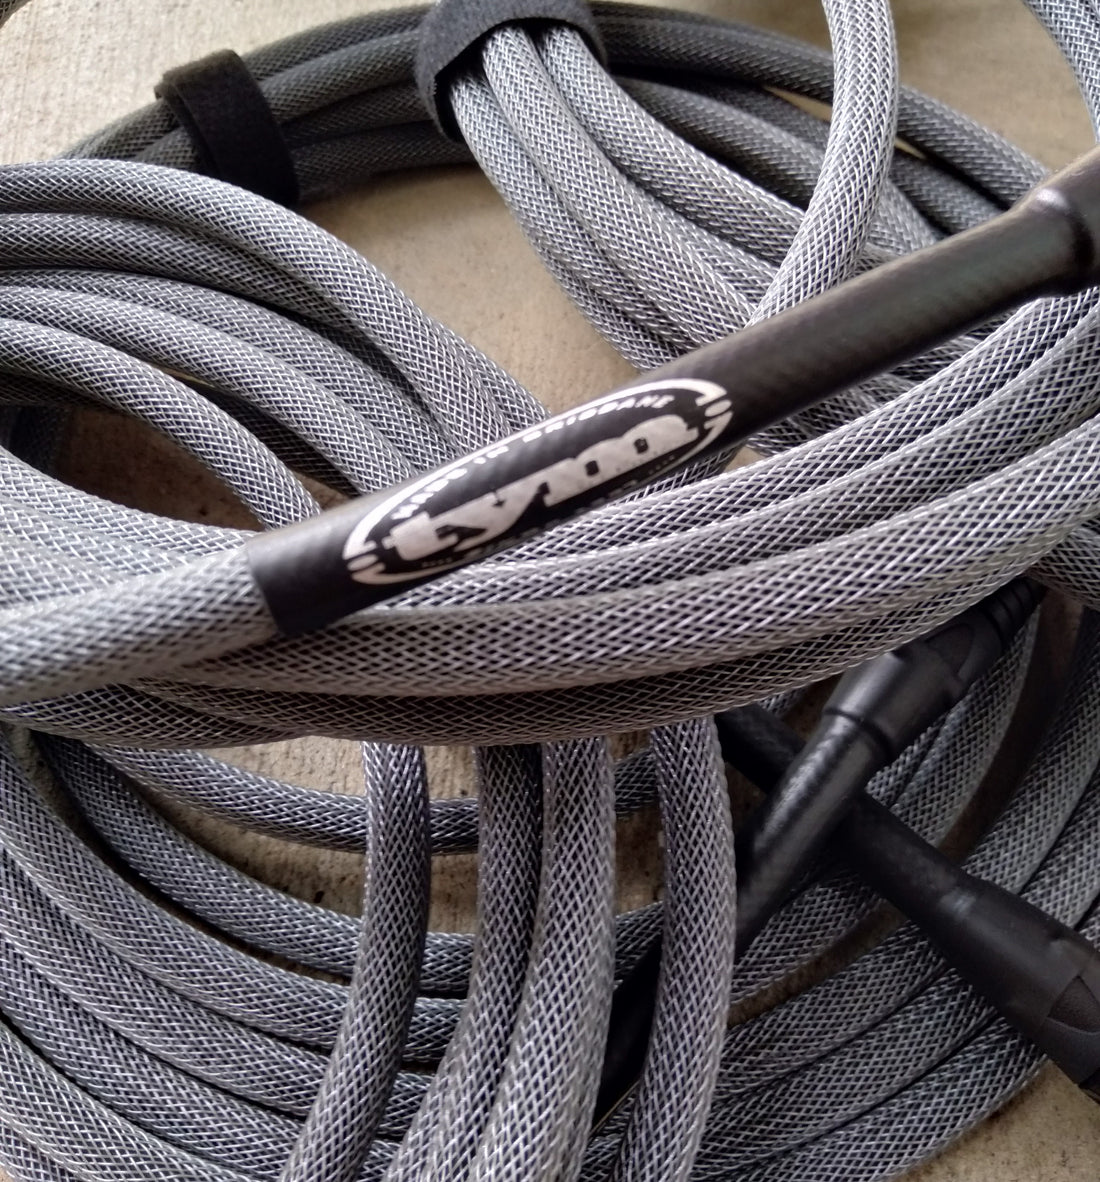 More Tym anniversary cables in stock